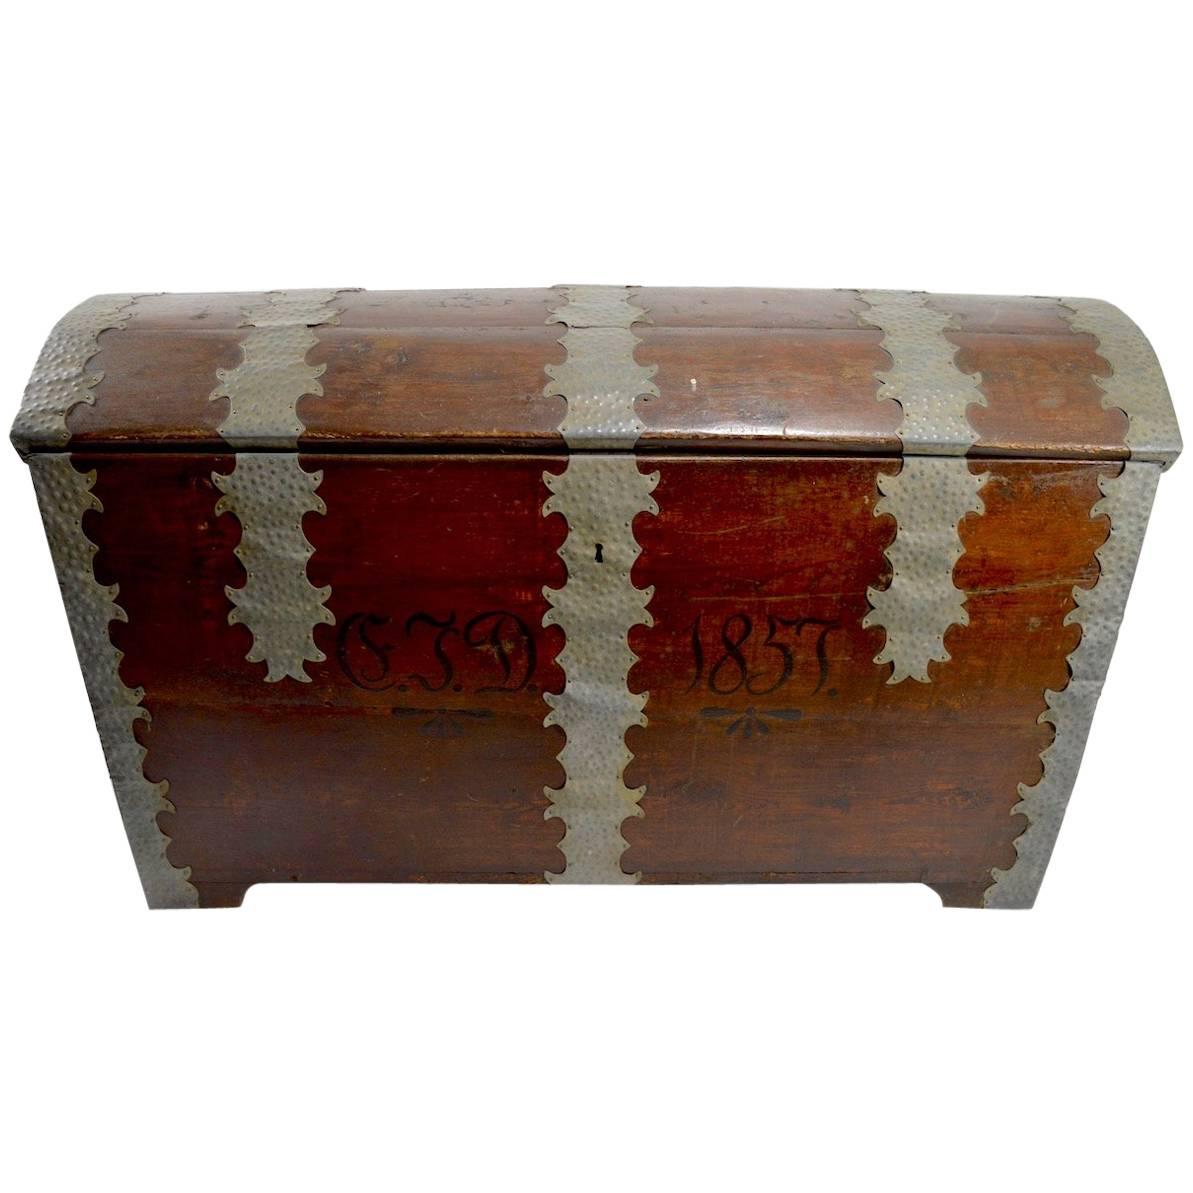 Large Dome Top Trunk, Dated 1857